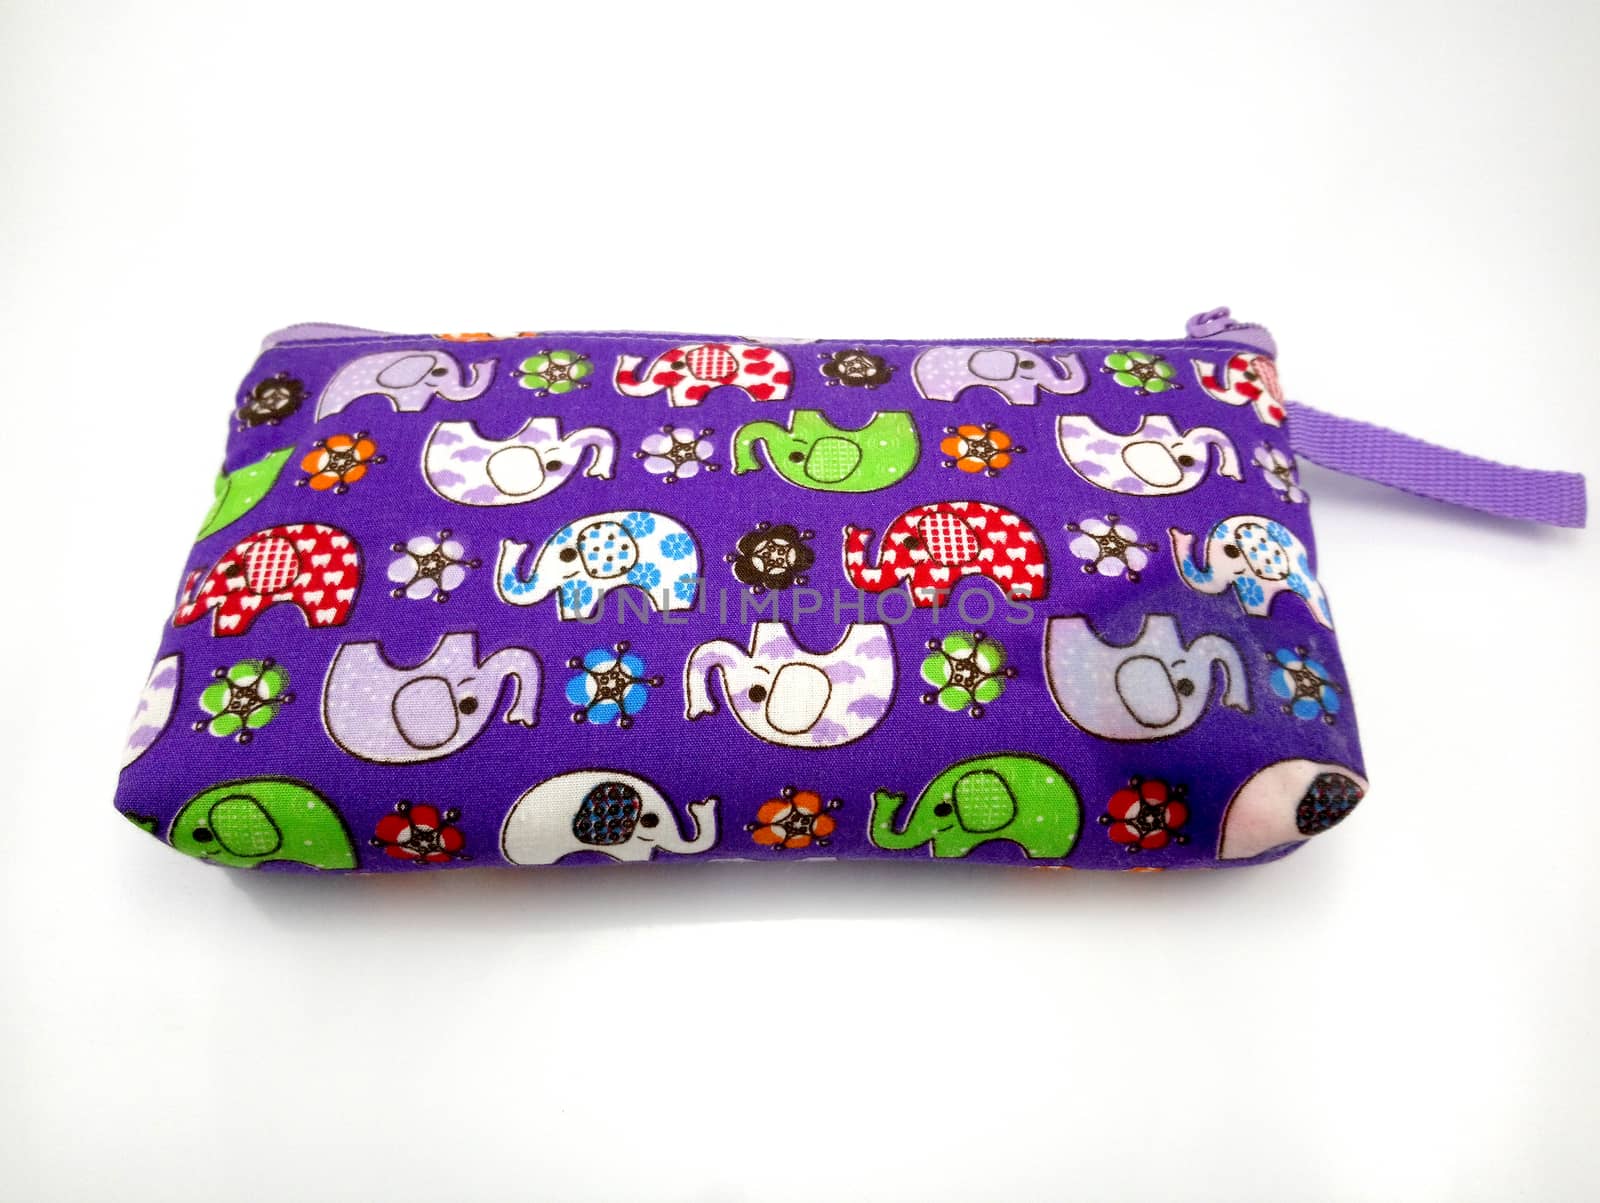 Elephant pouch purple case at Thailand in Manila, Philippines by imwaltersy